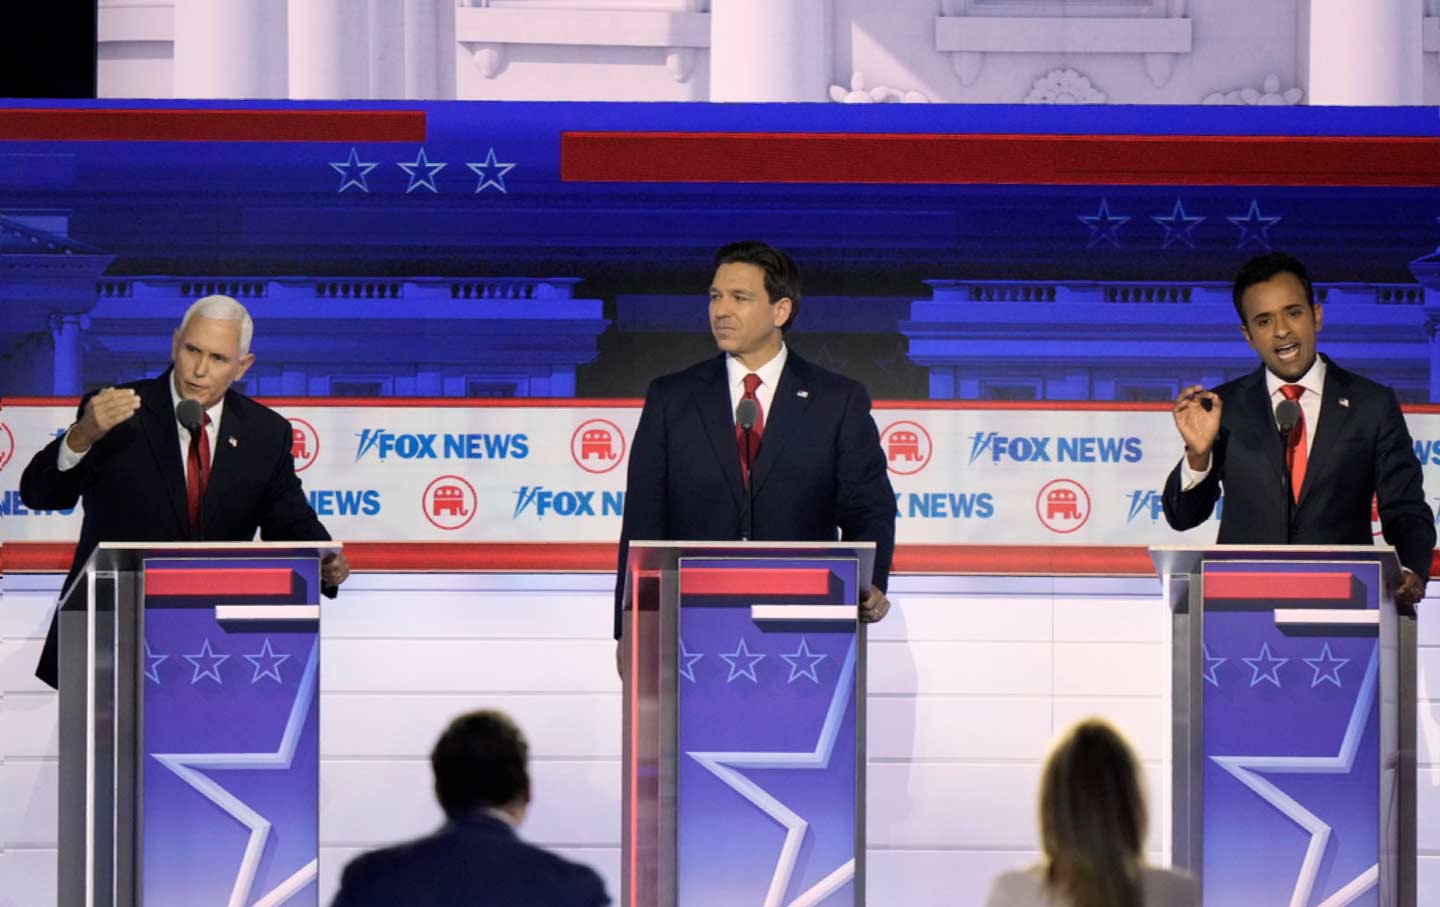 Florida Governor Ron DeSantis listens as former vice president Mike Pence and businessman Vivek Ramaswamy talk at the same time during a Republican presidential primary debate hosted by the Fox News Channel on Wednesday, Aug. 23, 2023, in Milwaukee.